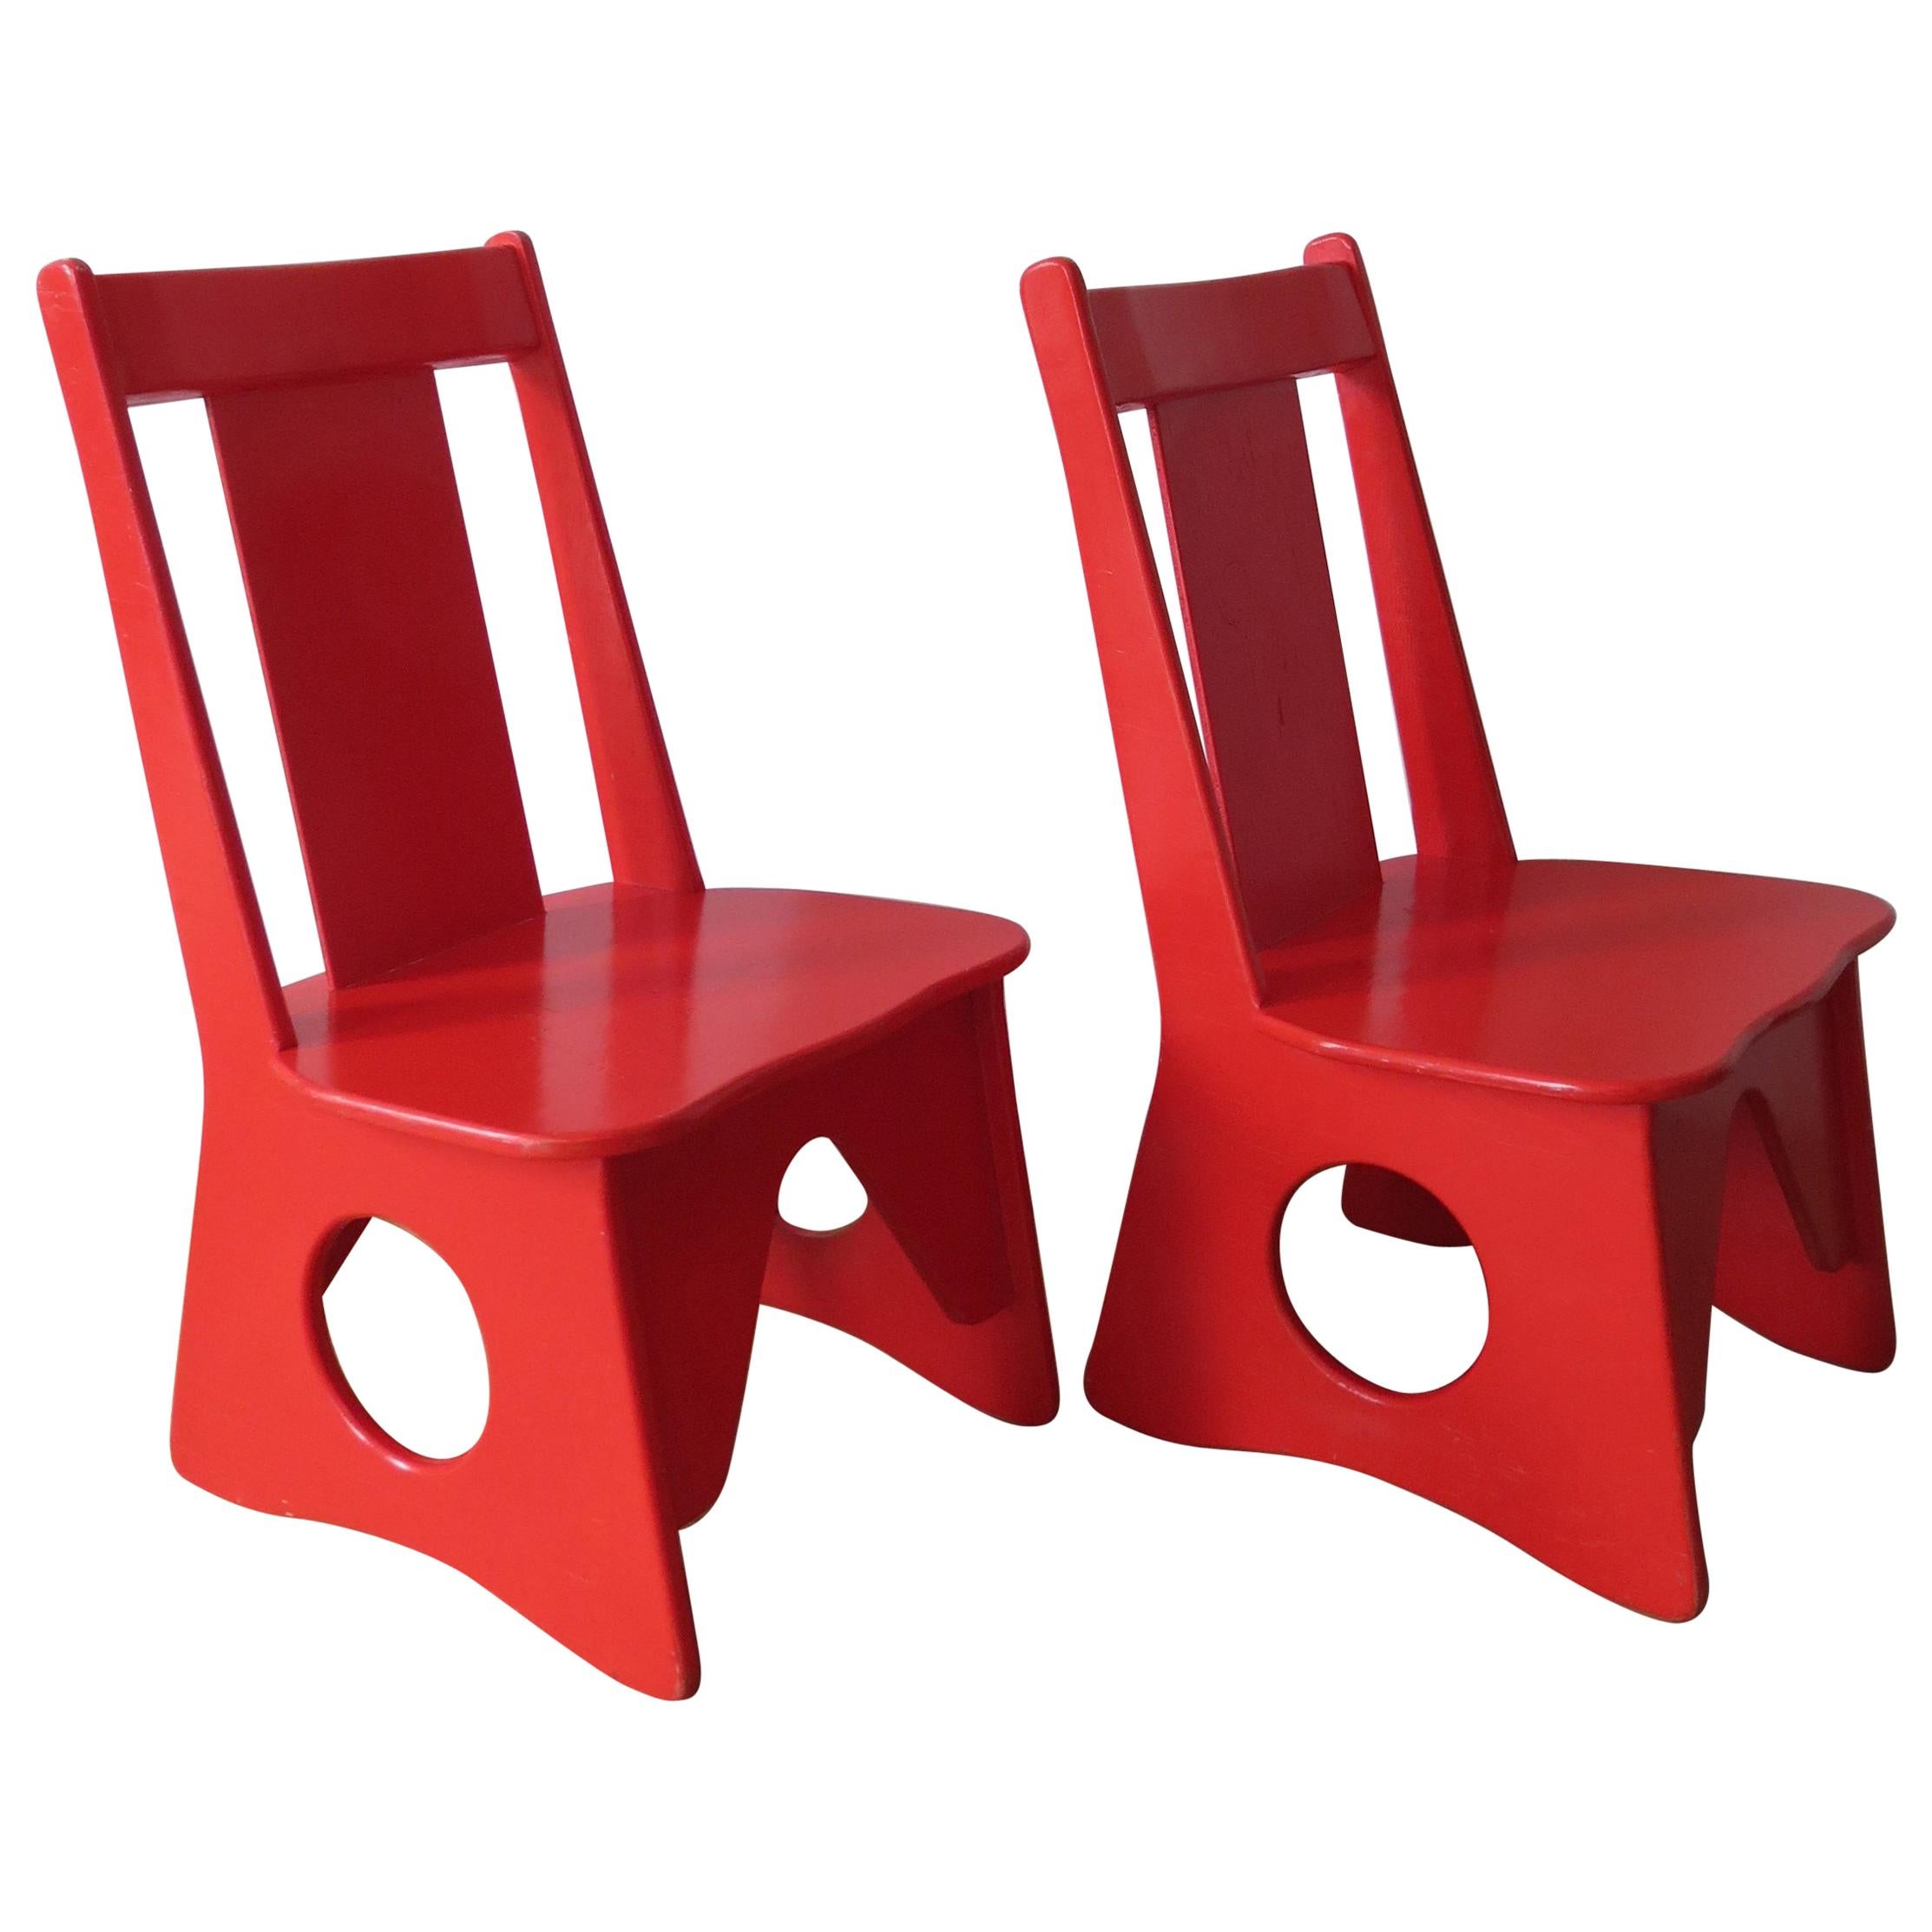 Pair of Original 1960s Red Childrens Chairs